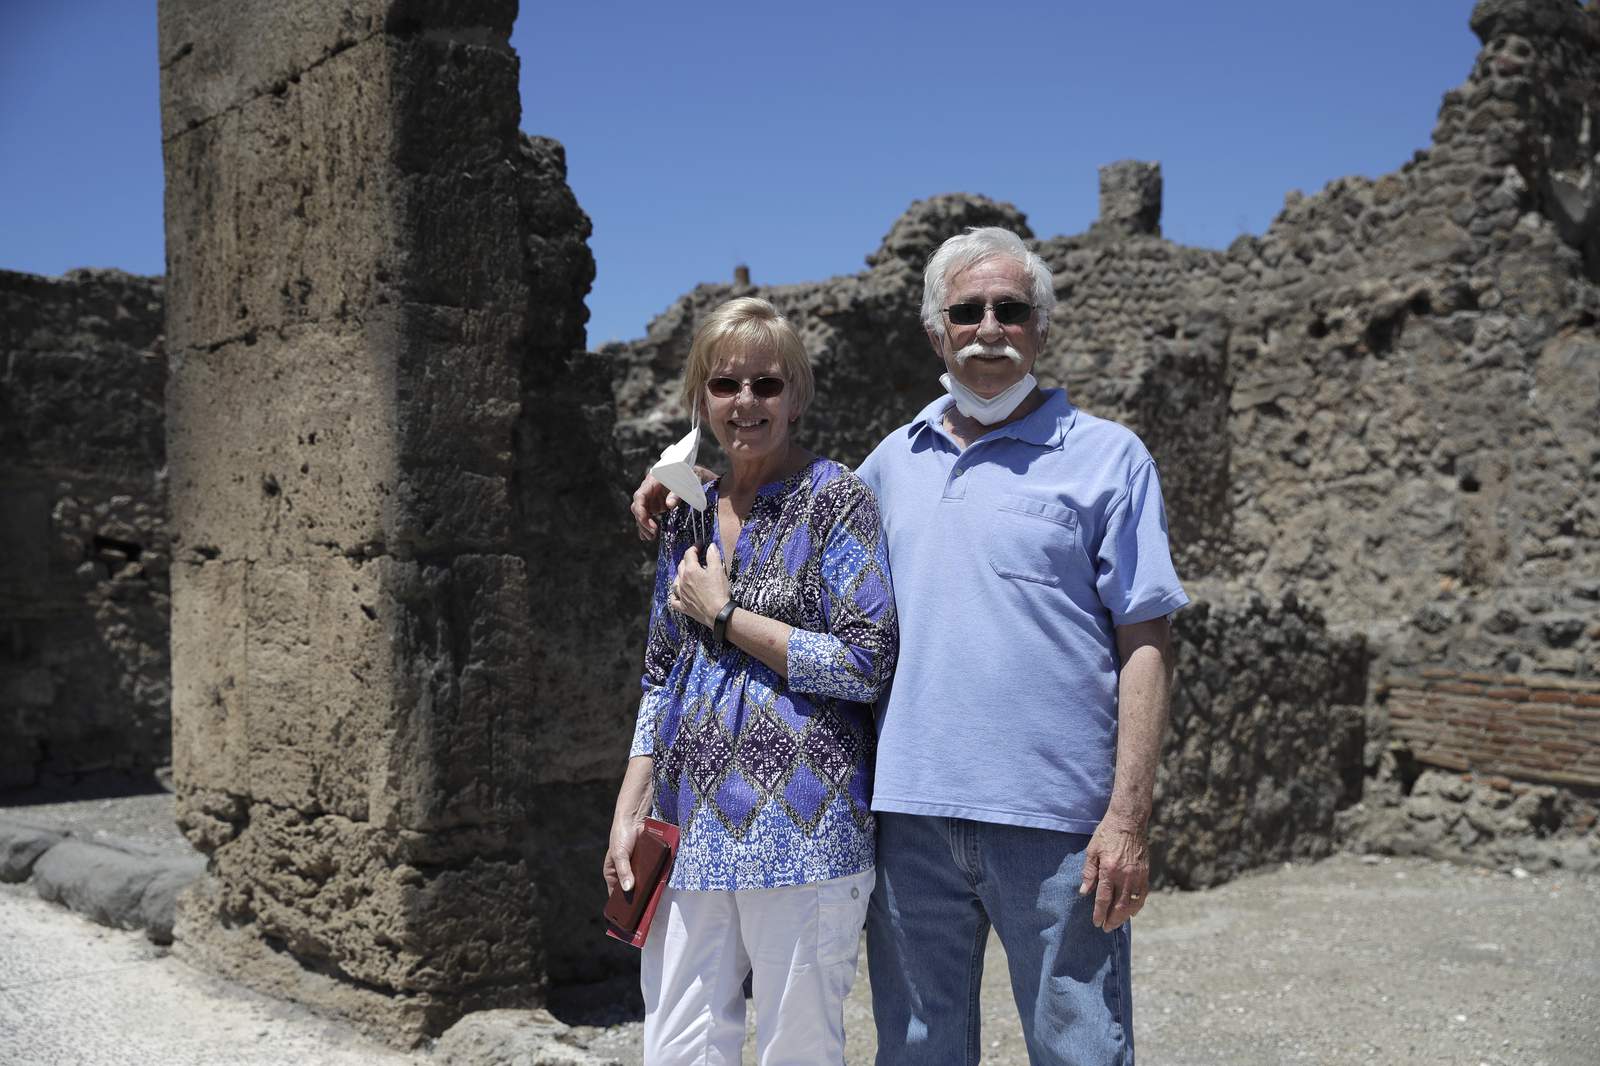 Detroit-area couple waits 2 1/2 months in lockdown to visit Pompeii